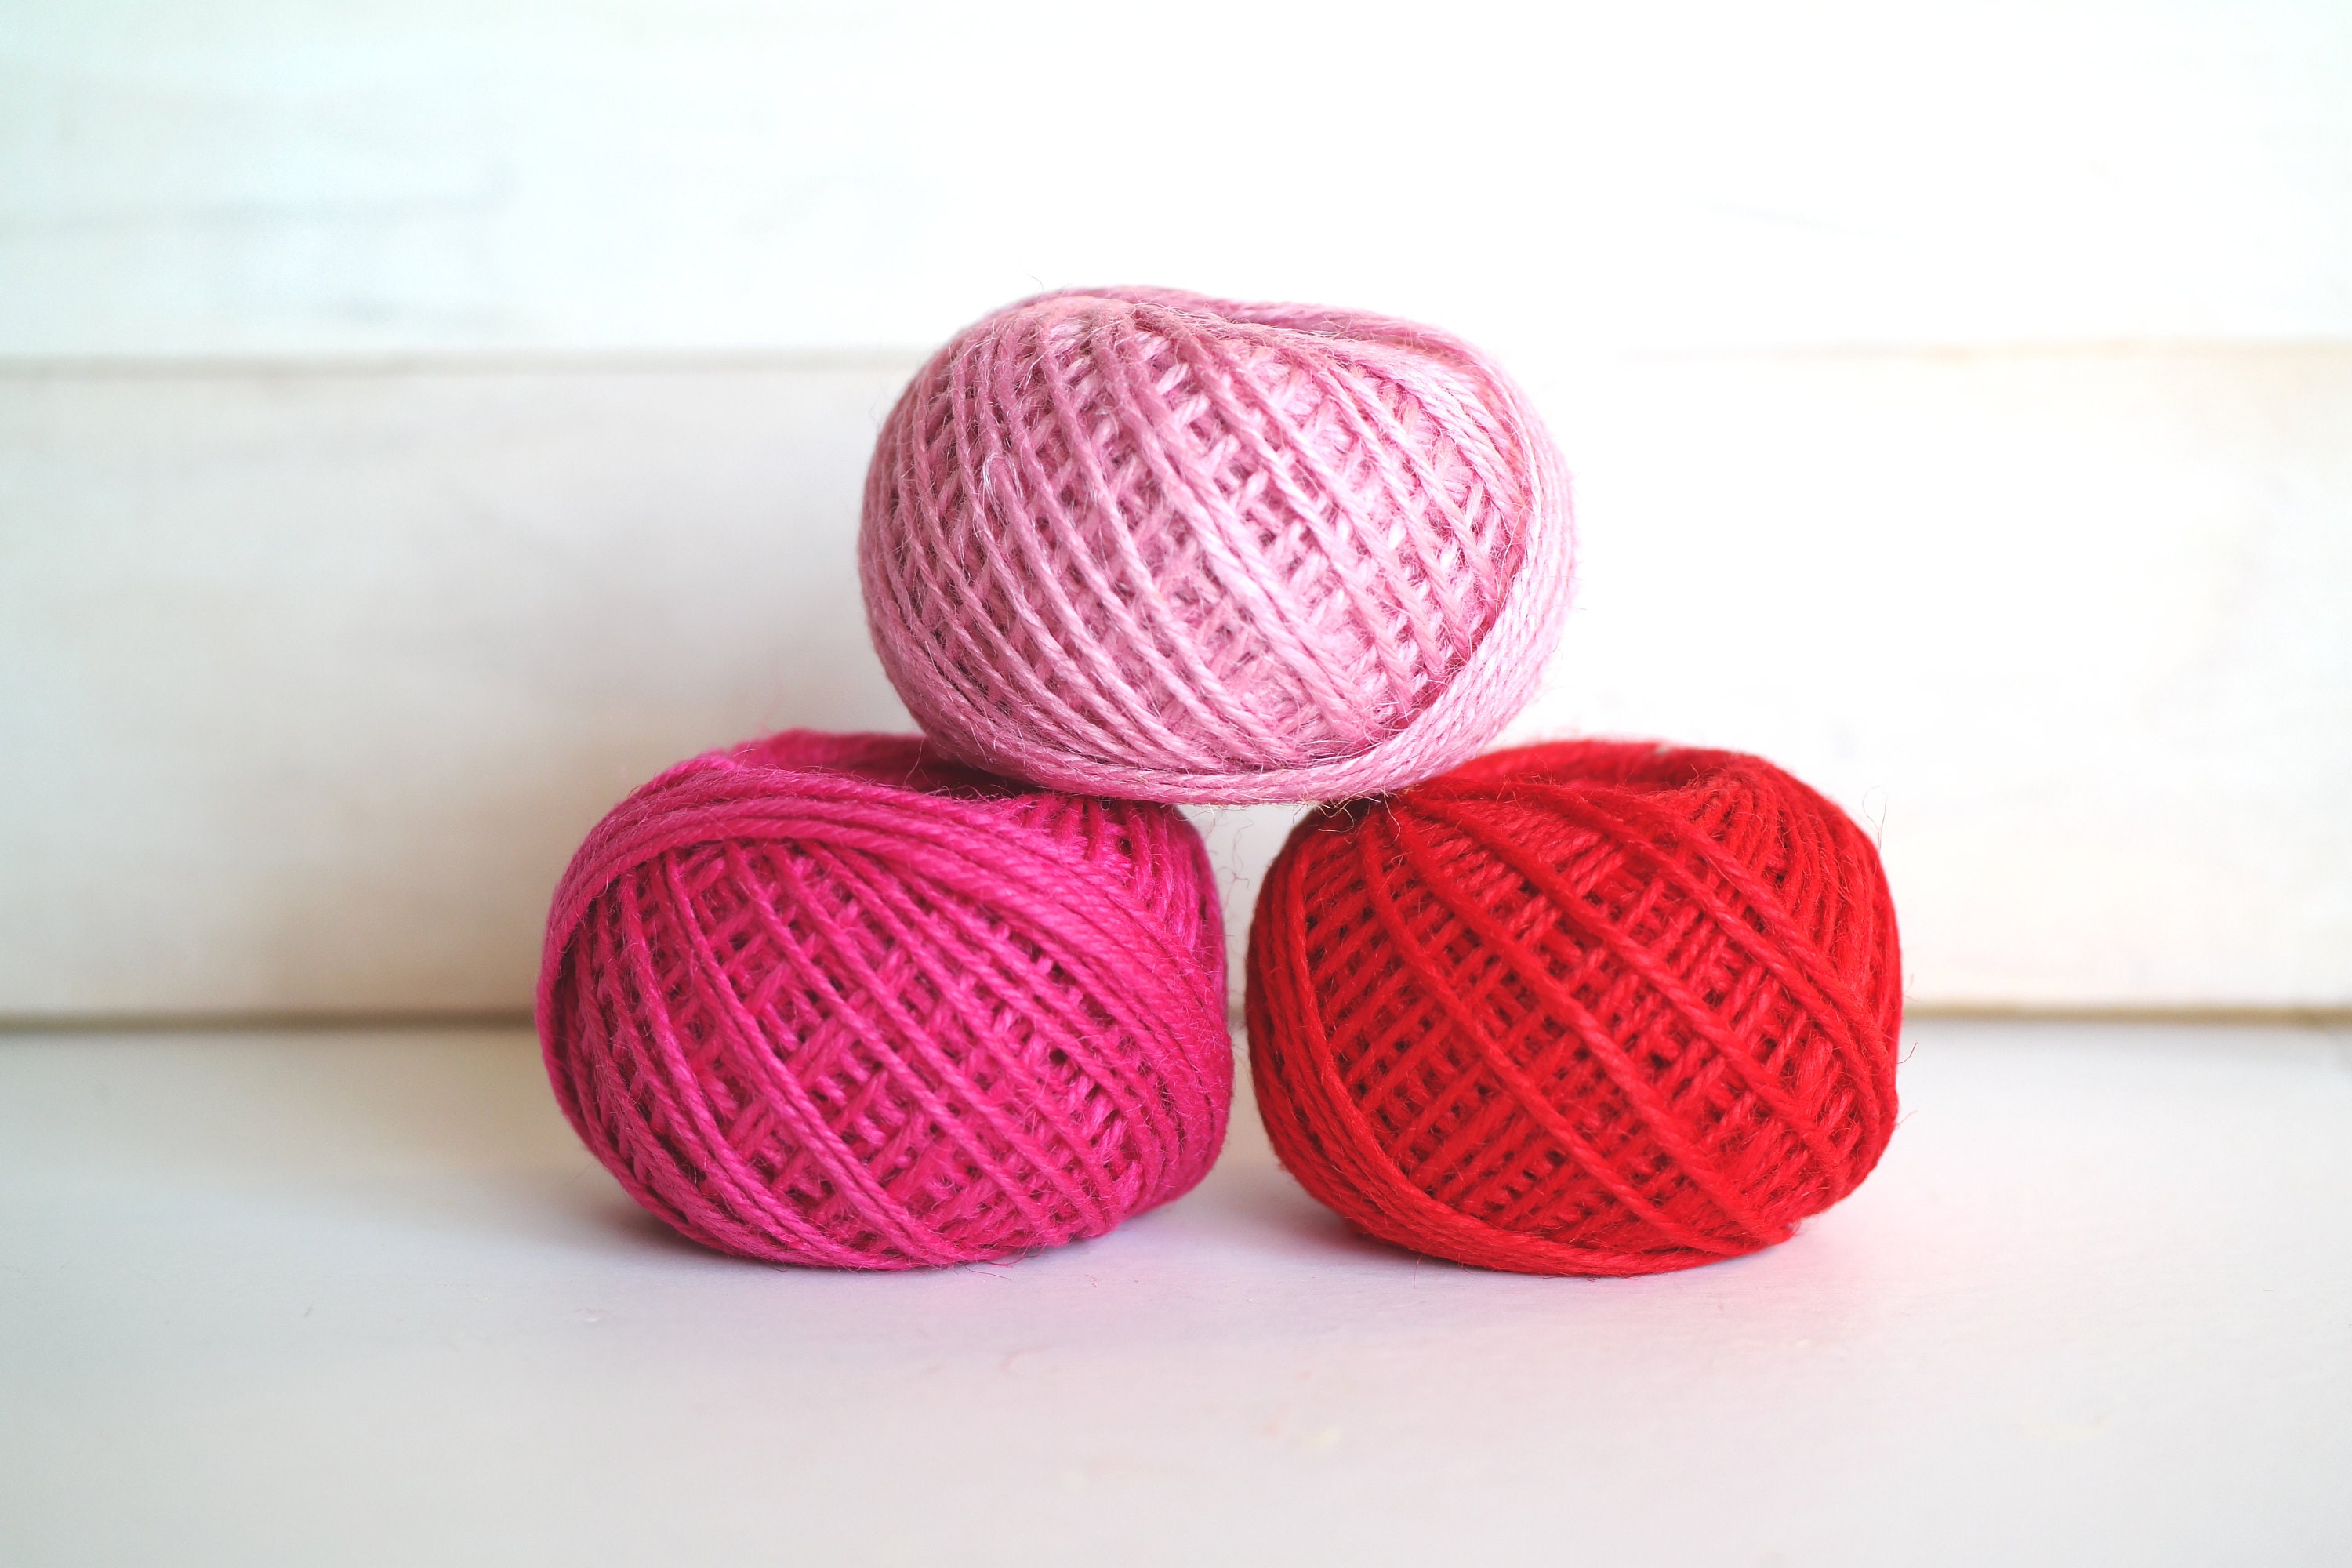 Pack of 3 Assorted 2m Love Pink Twine Thread by Icon Craft